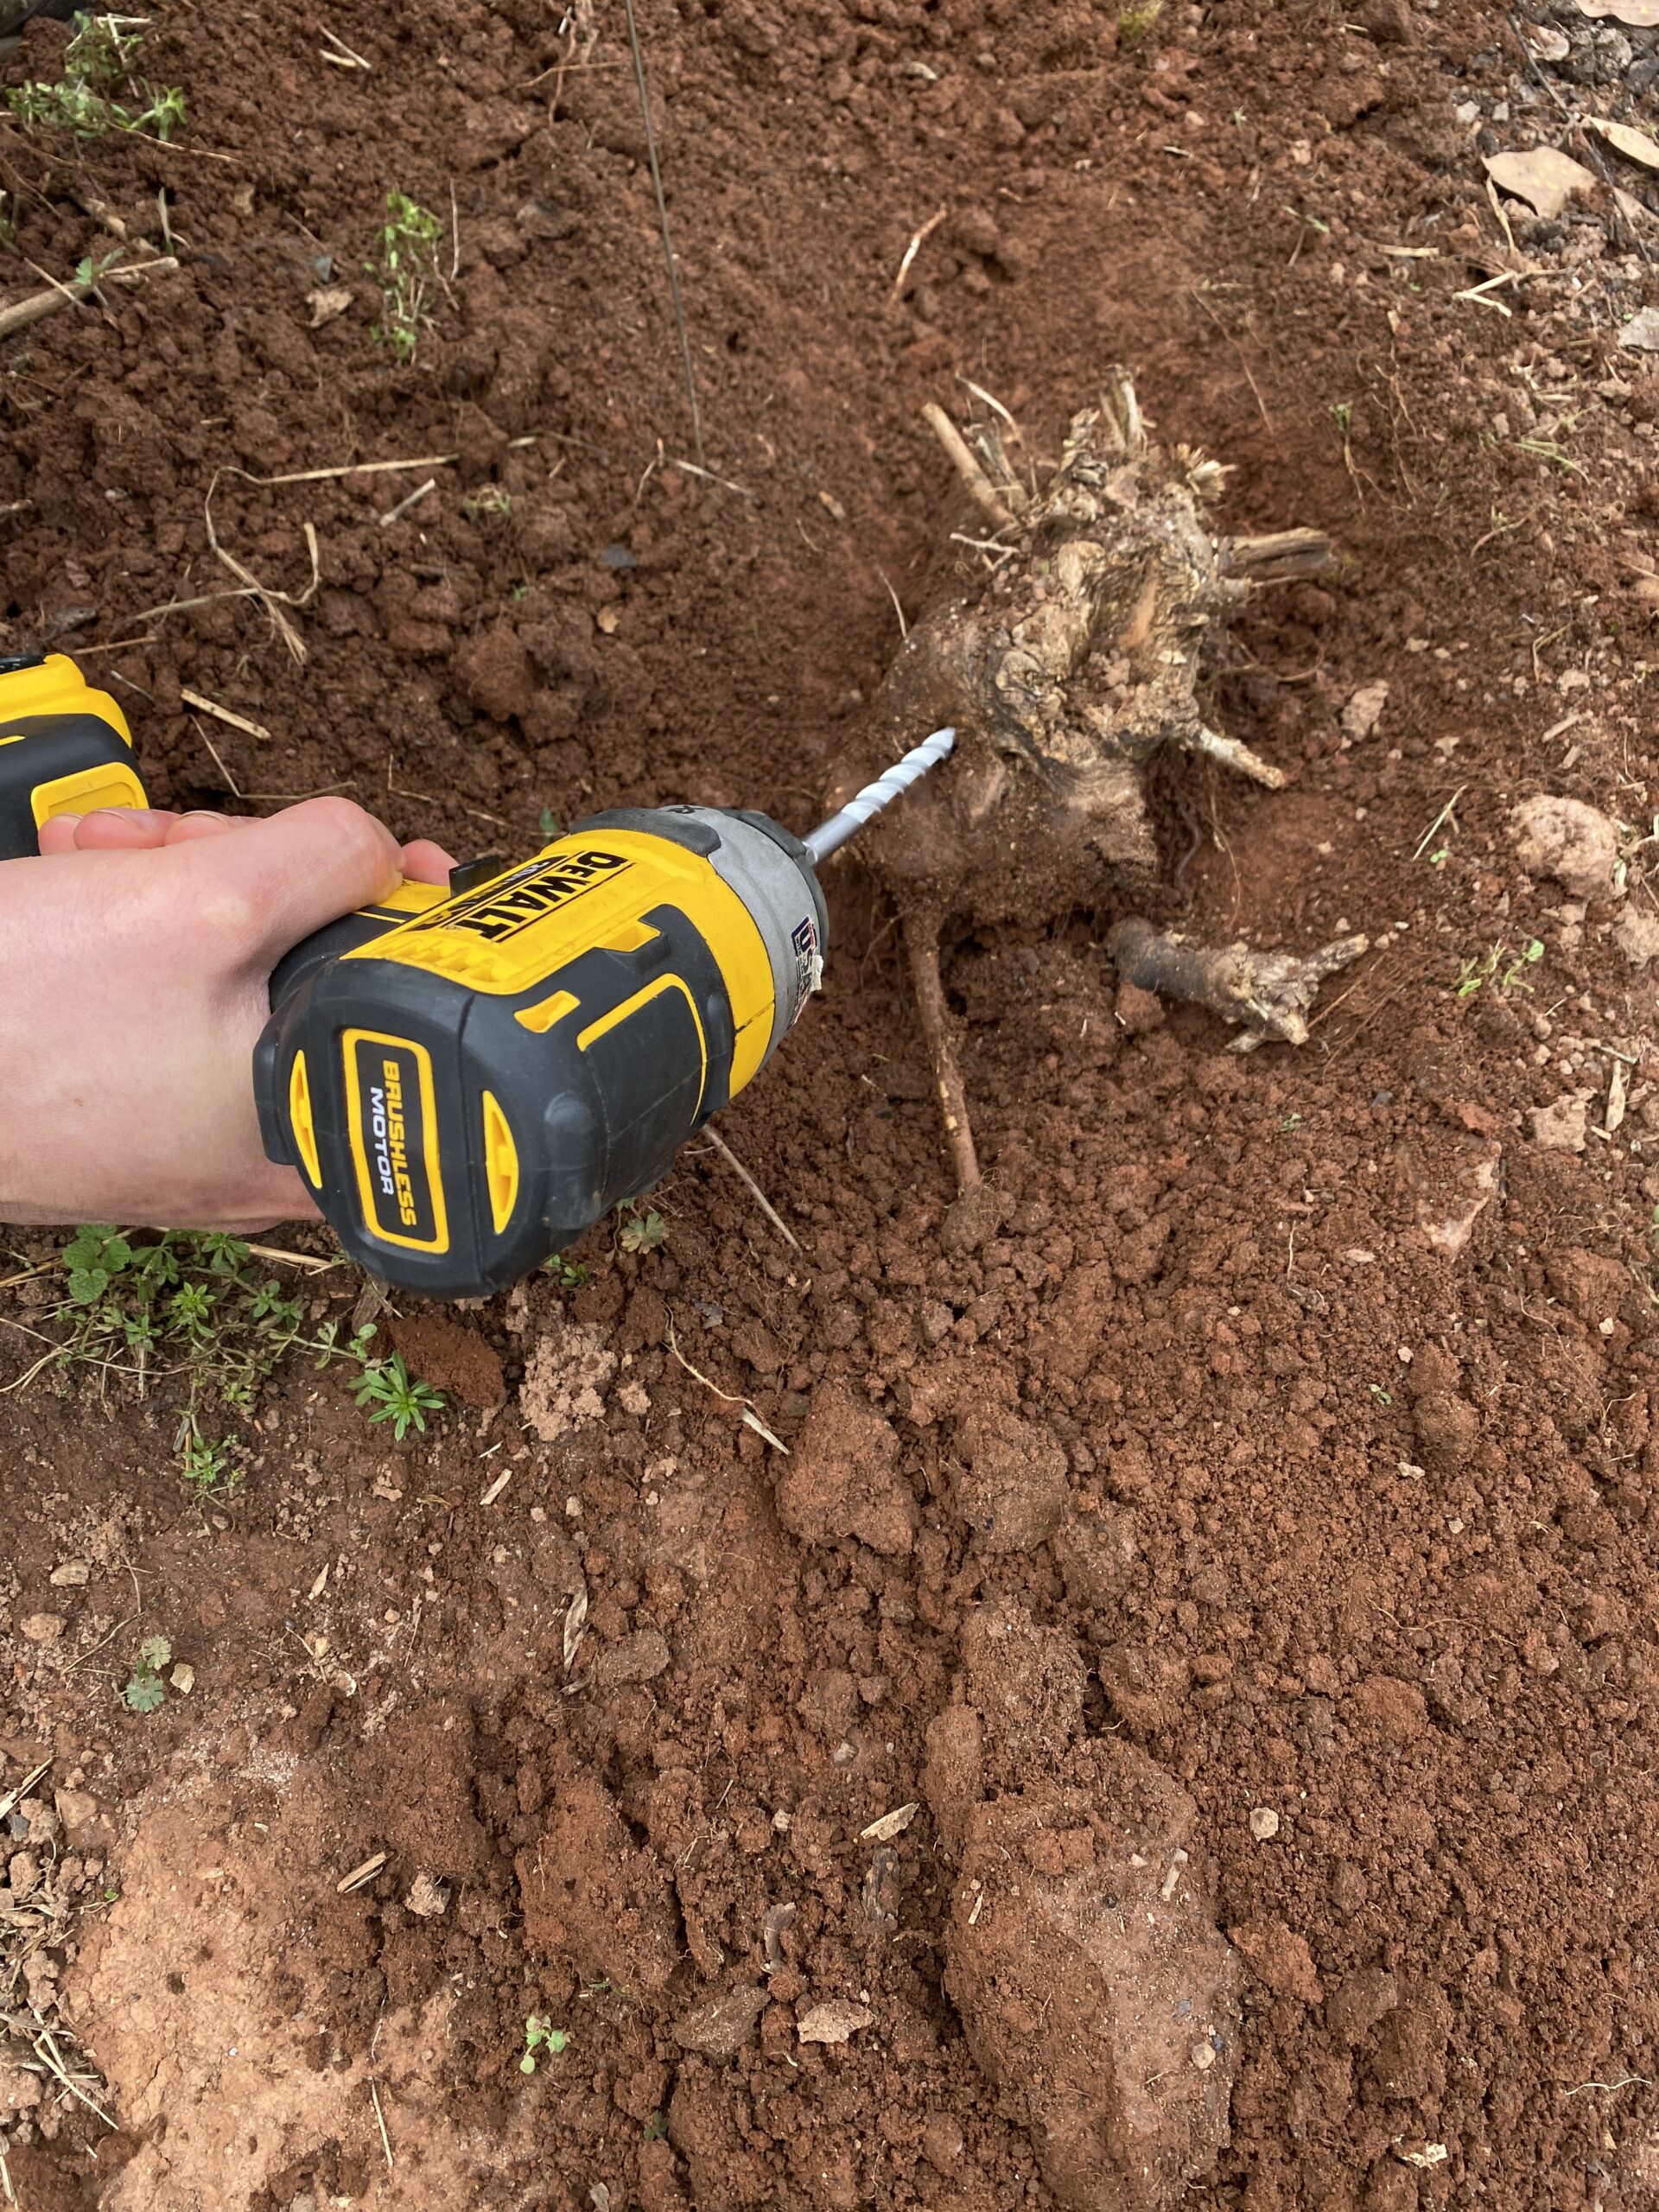 Drilling a hole into the enormous, starch-rich root of the kudzu vine.